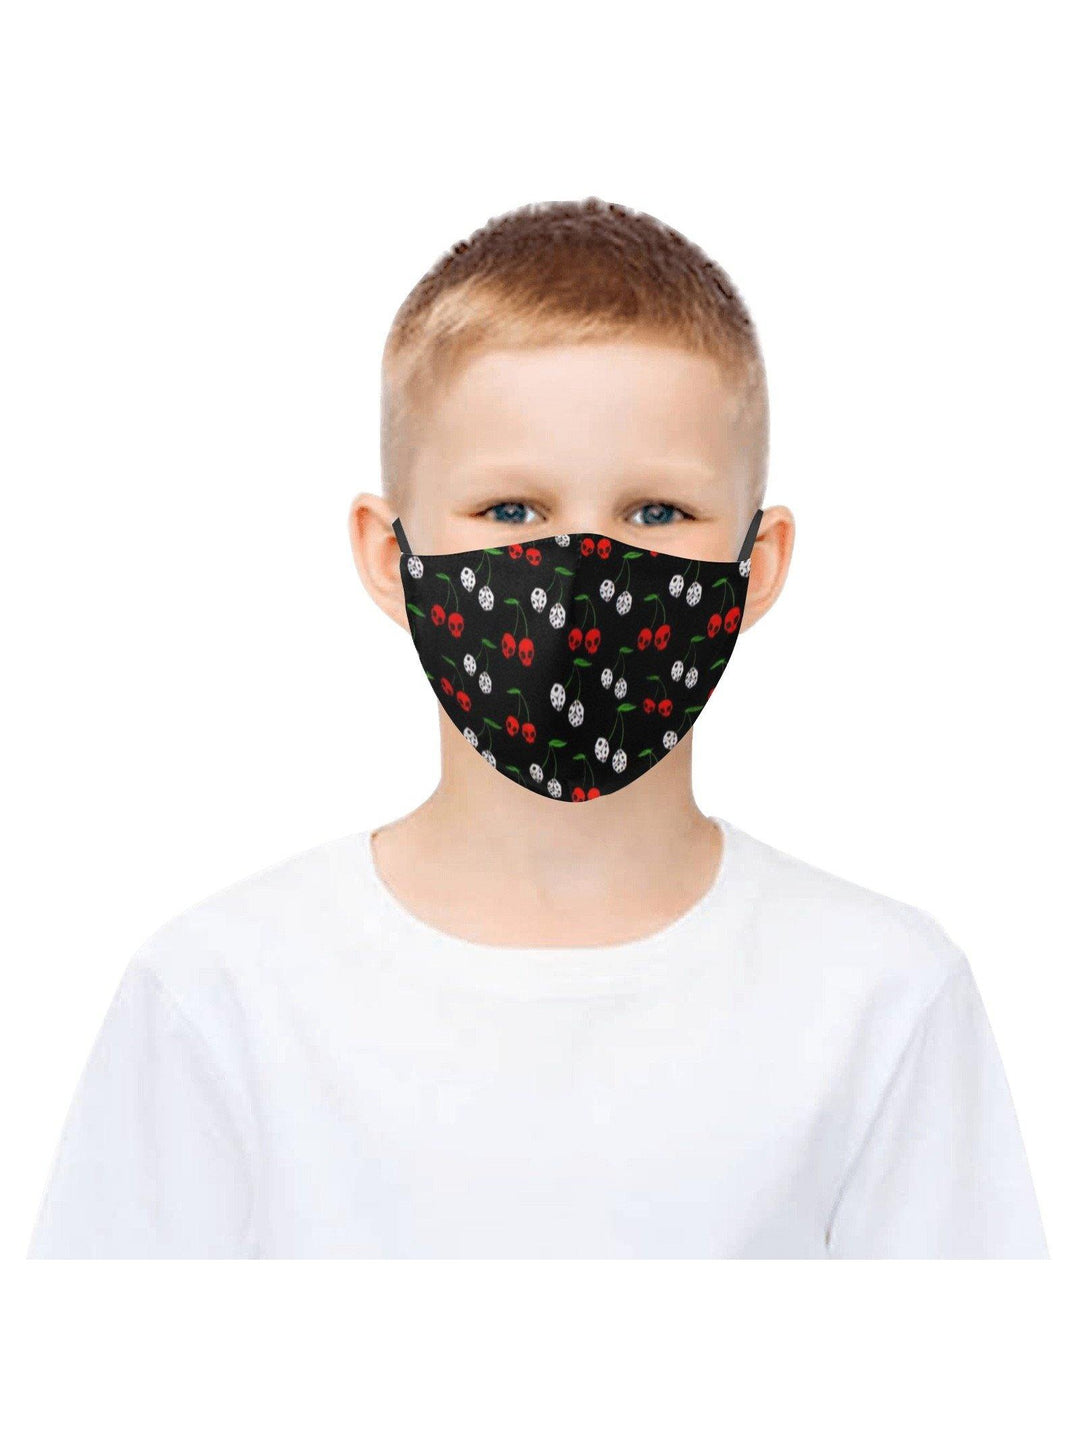 REUSABLE FACE MASKS WITH FILTERS - CHERRY SKULLS & DICE